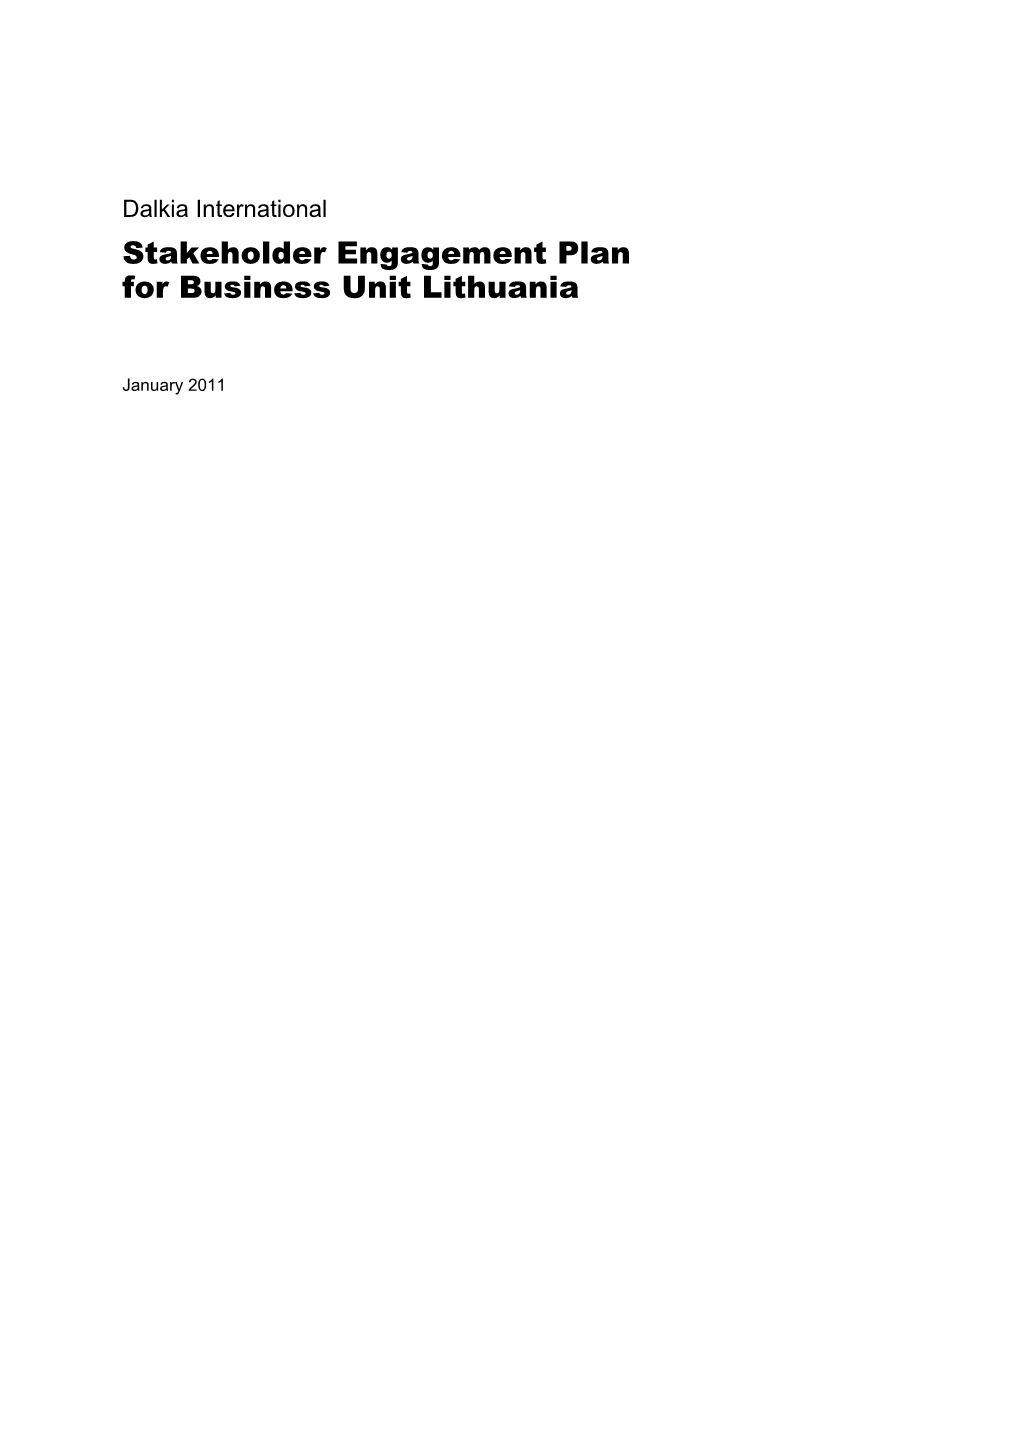 Stakeholder Engagement Plan for Business Unit Lithuania